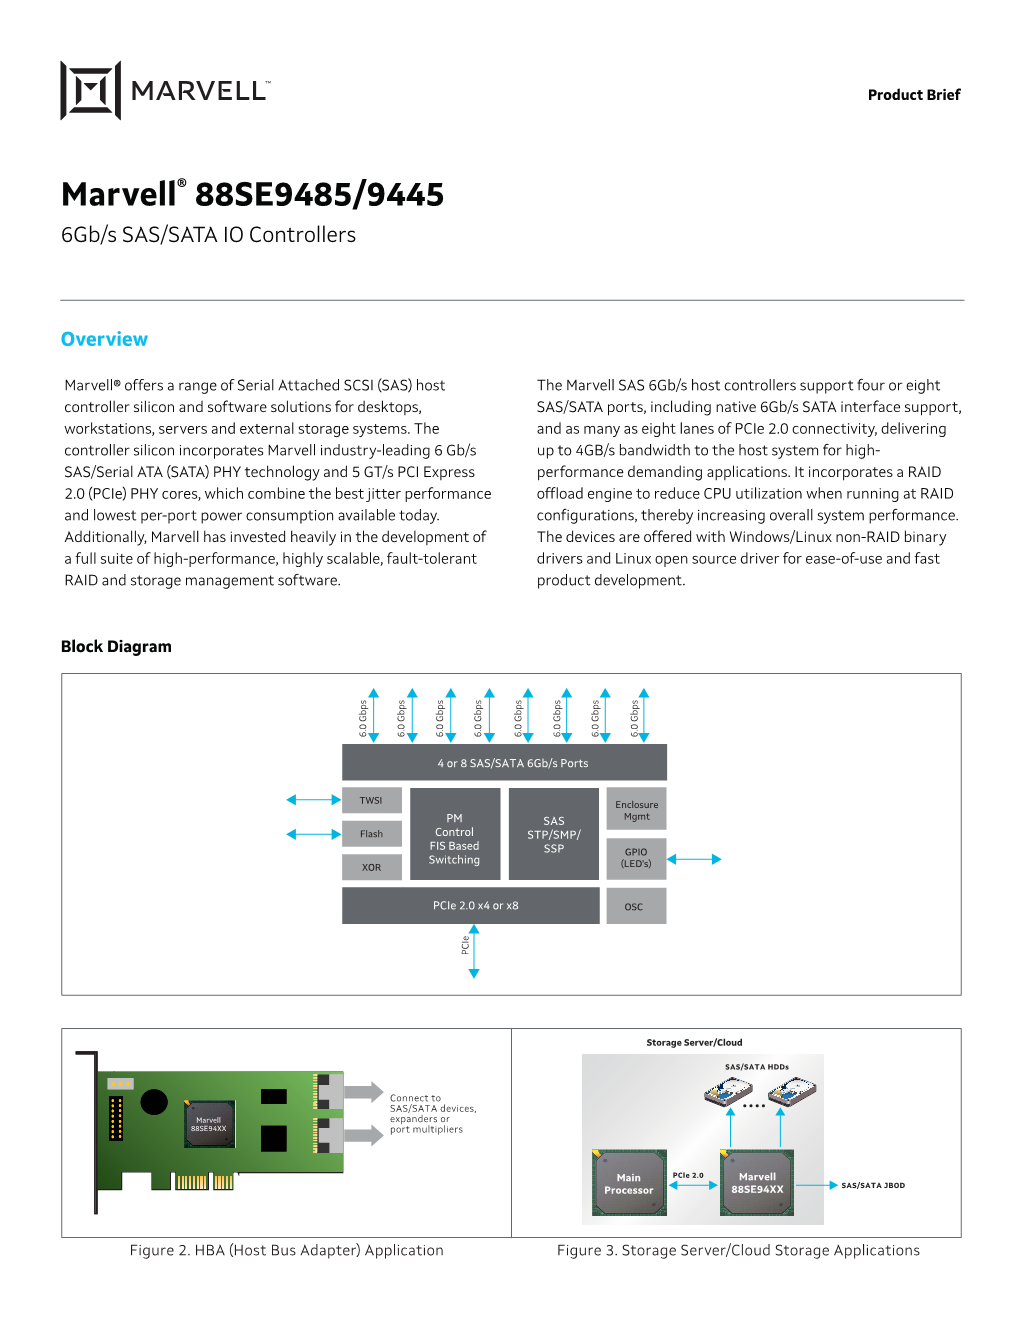 Marvell 88SE9485/9445 Product Brief